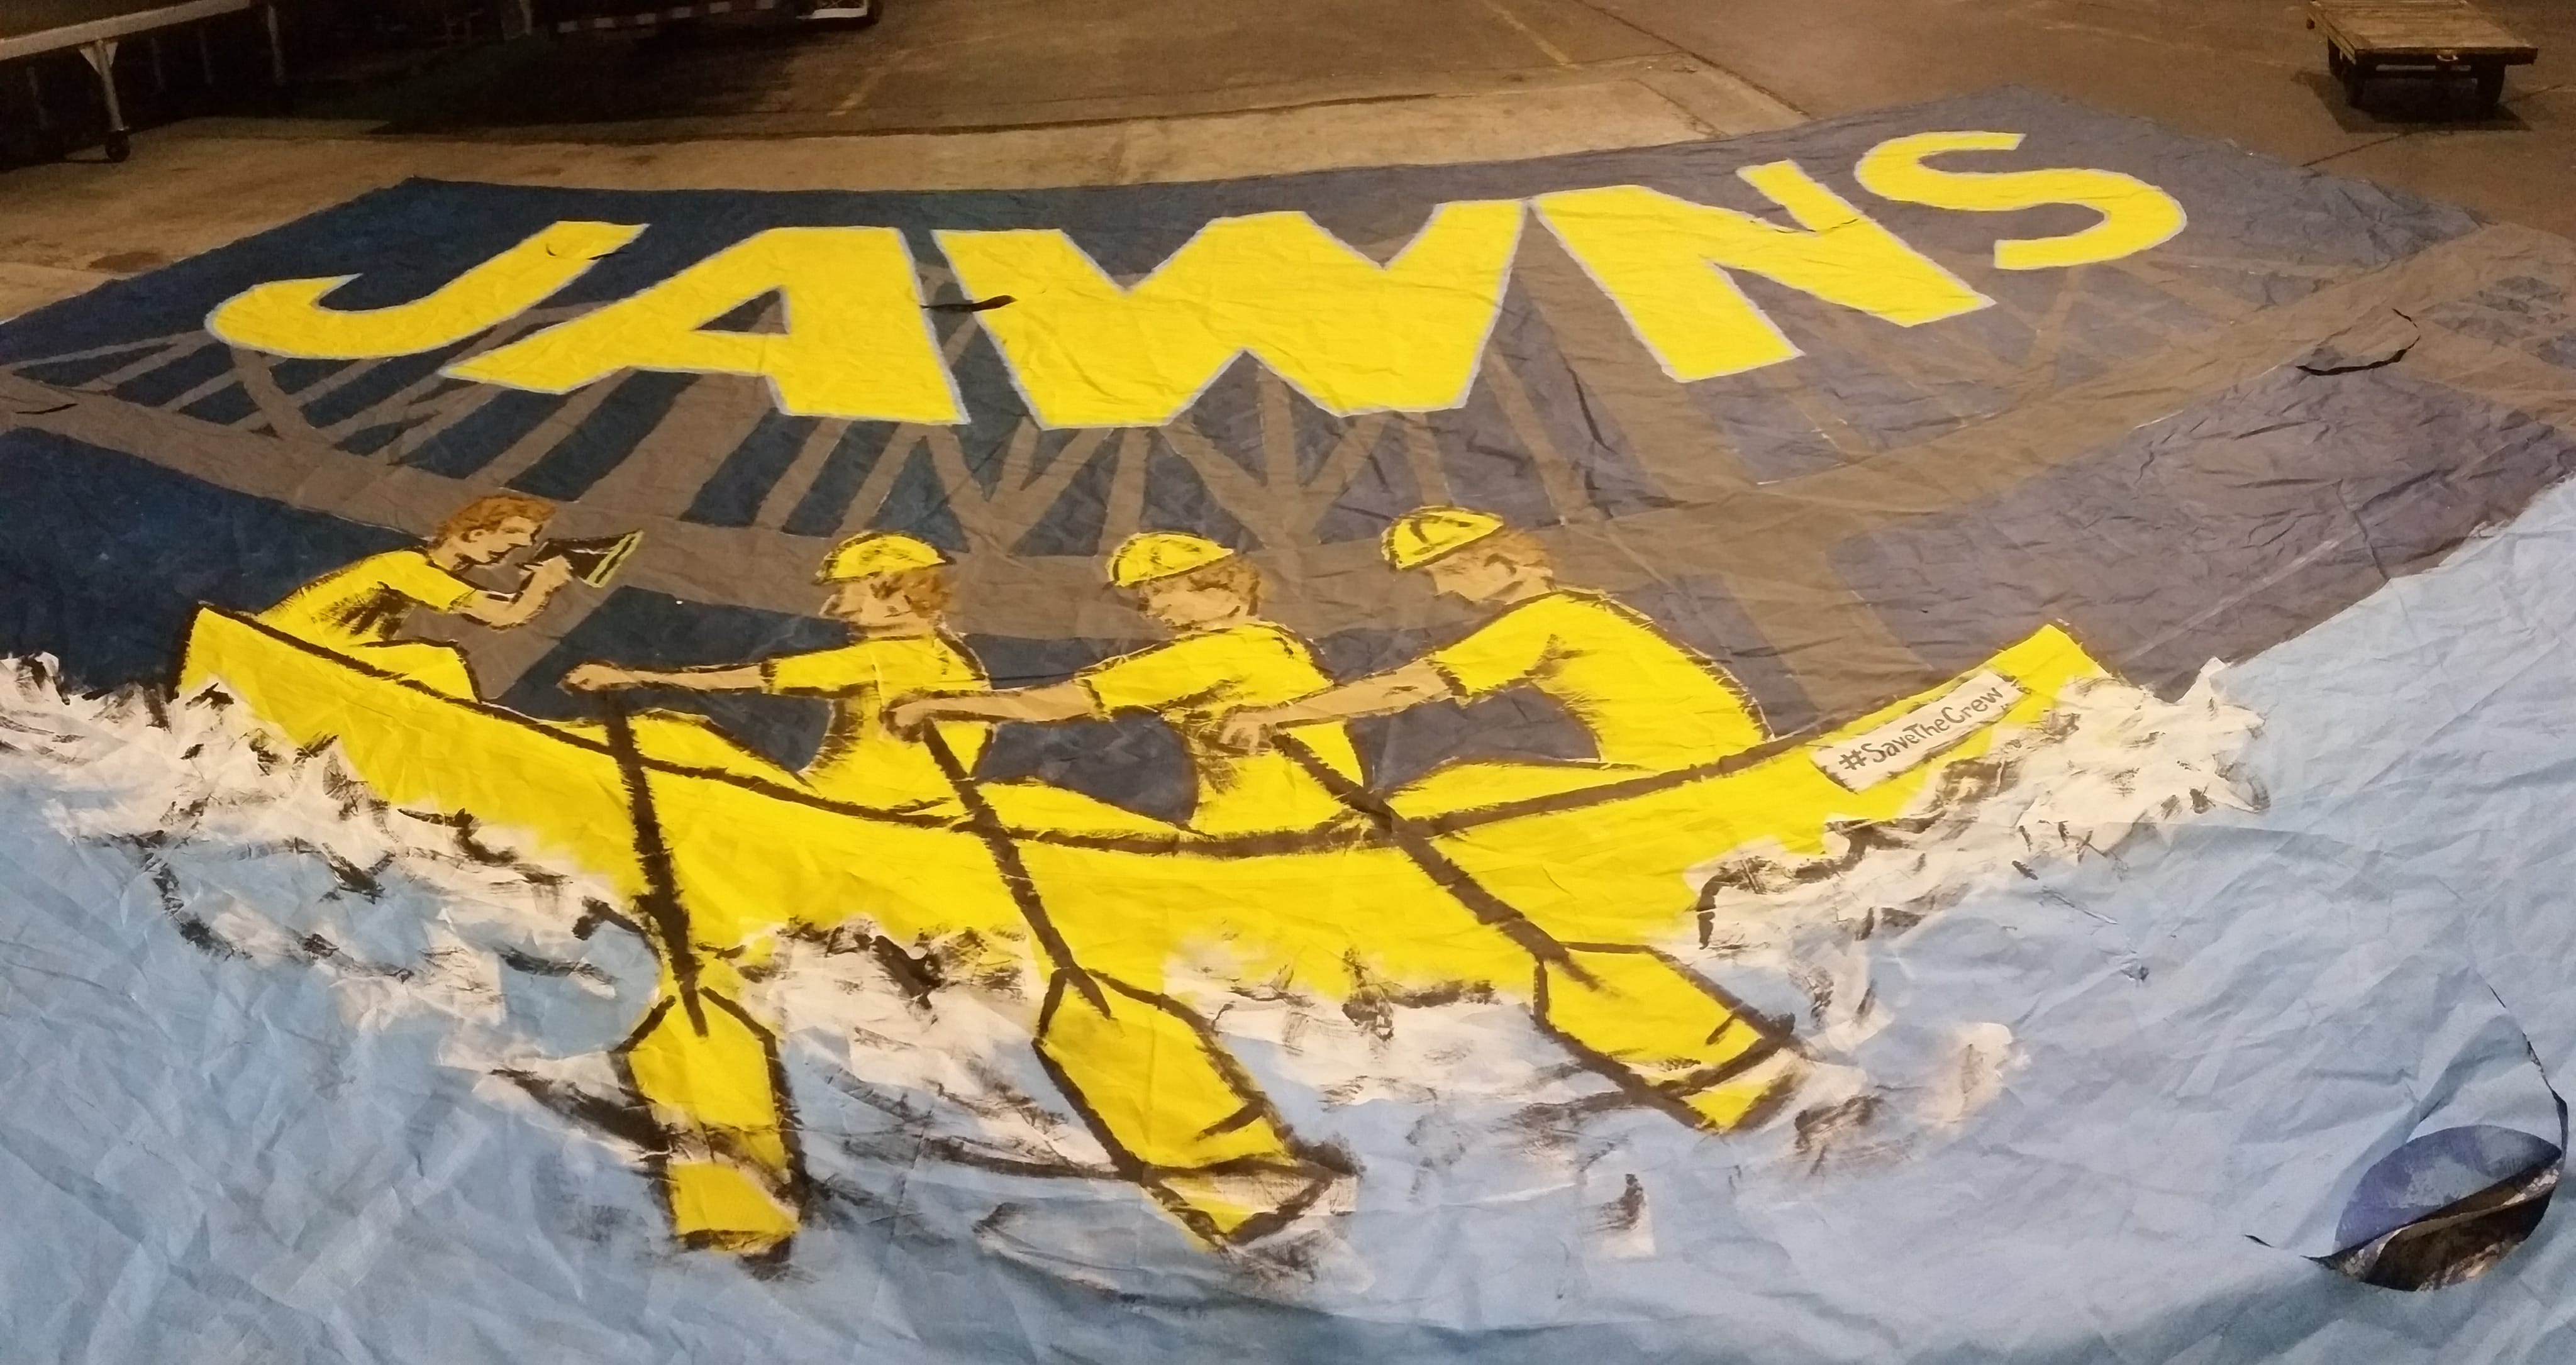 “Jawns” tifo for the Philadelphia Union match against the Columbus Crew